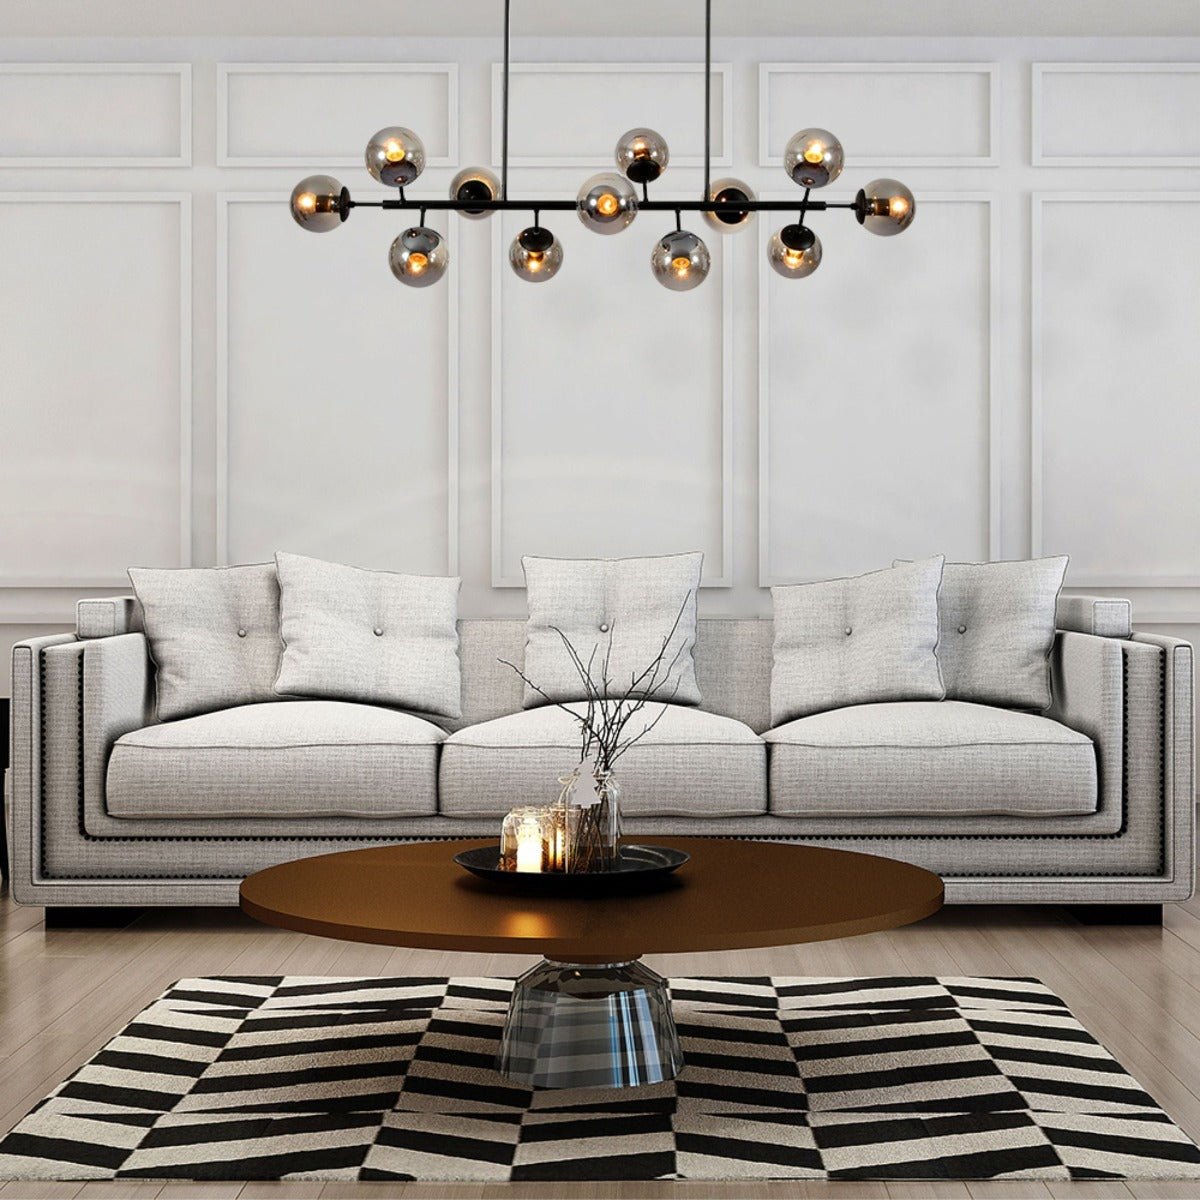 another living room design for Modern Molecule Style Amber Smoky Opal Glass Globe Gold Black Metal Body Island Chandelier Ceiling Light E27